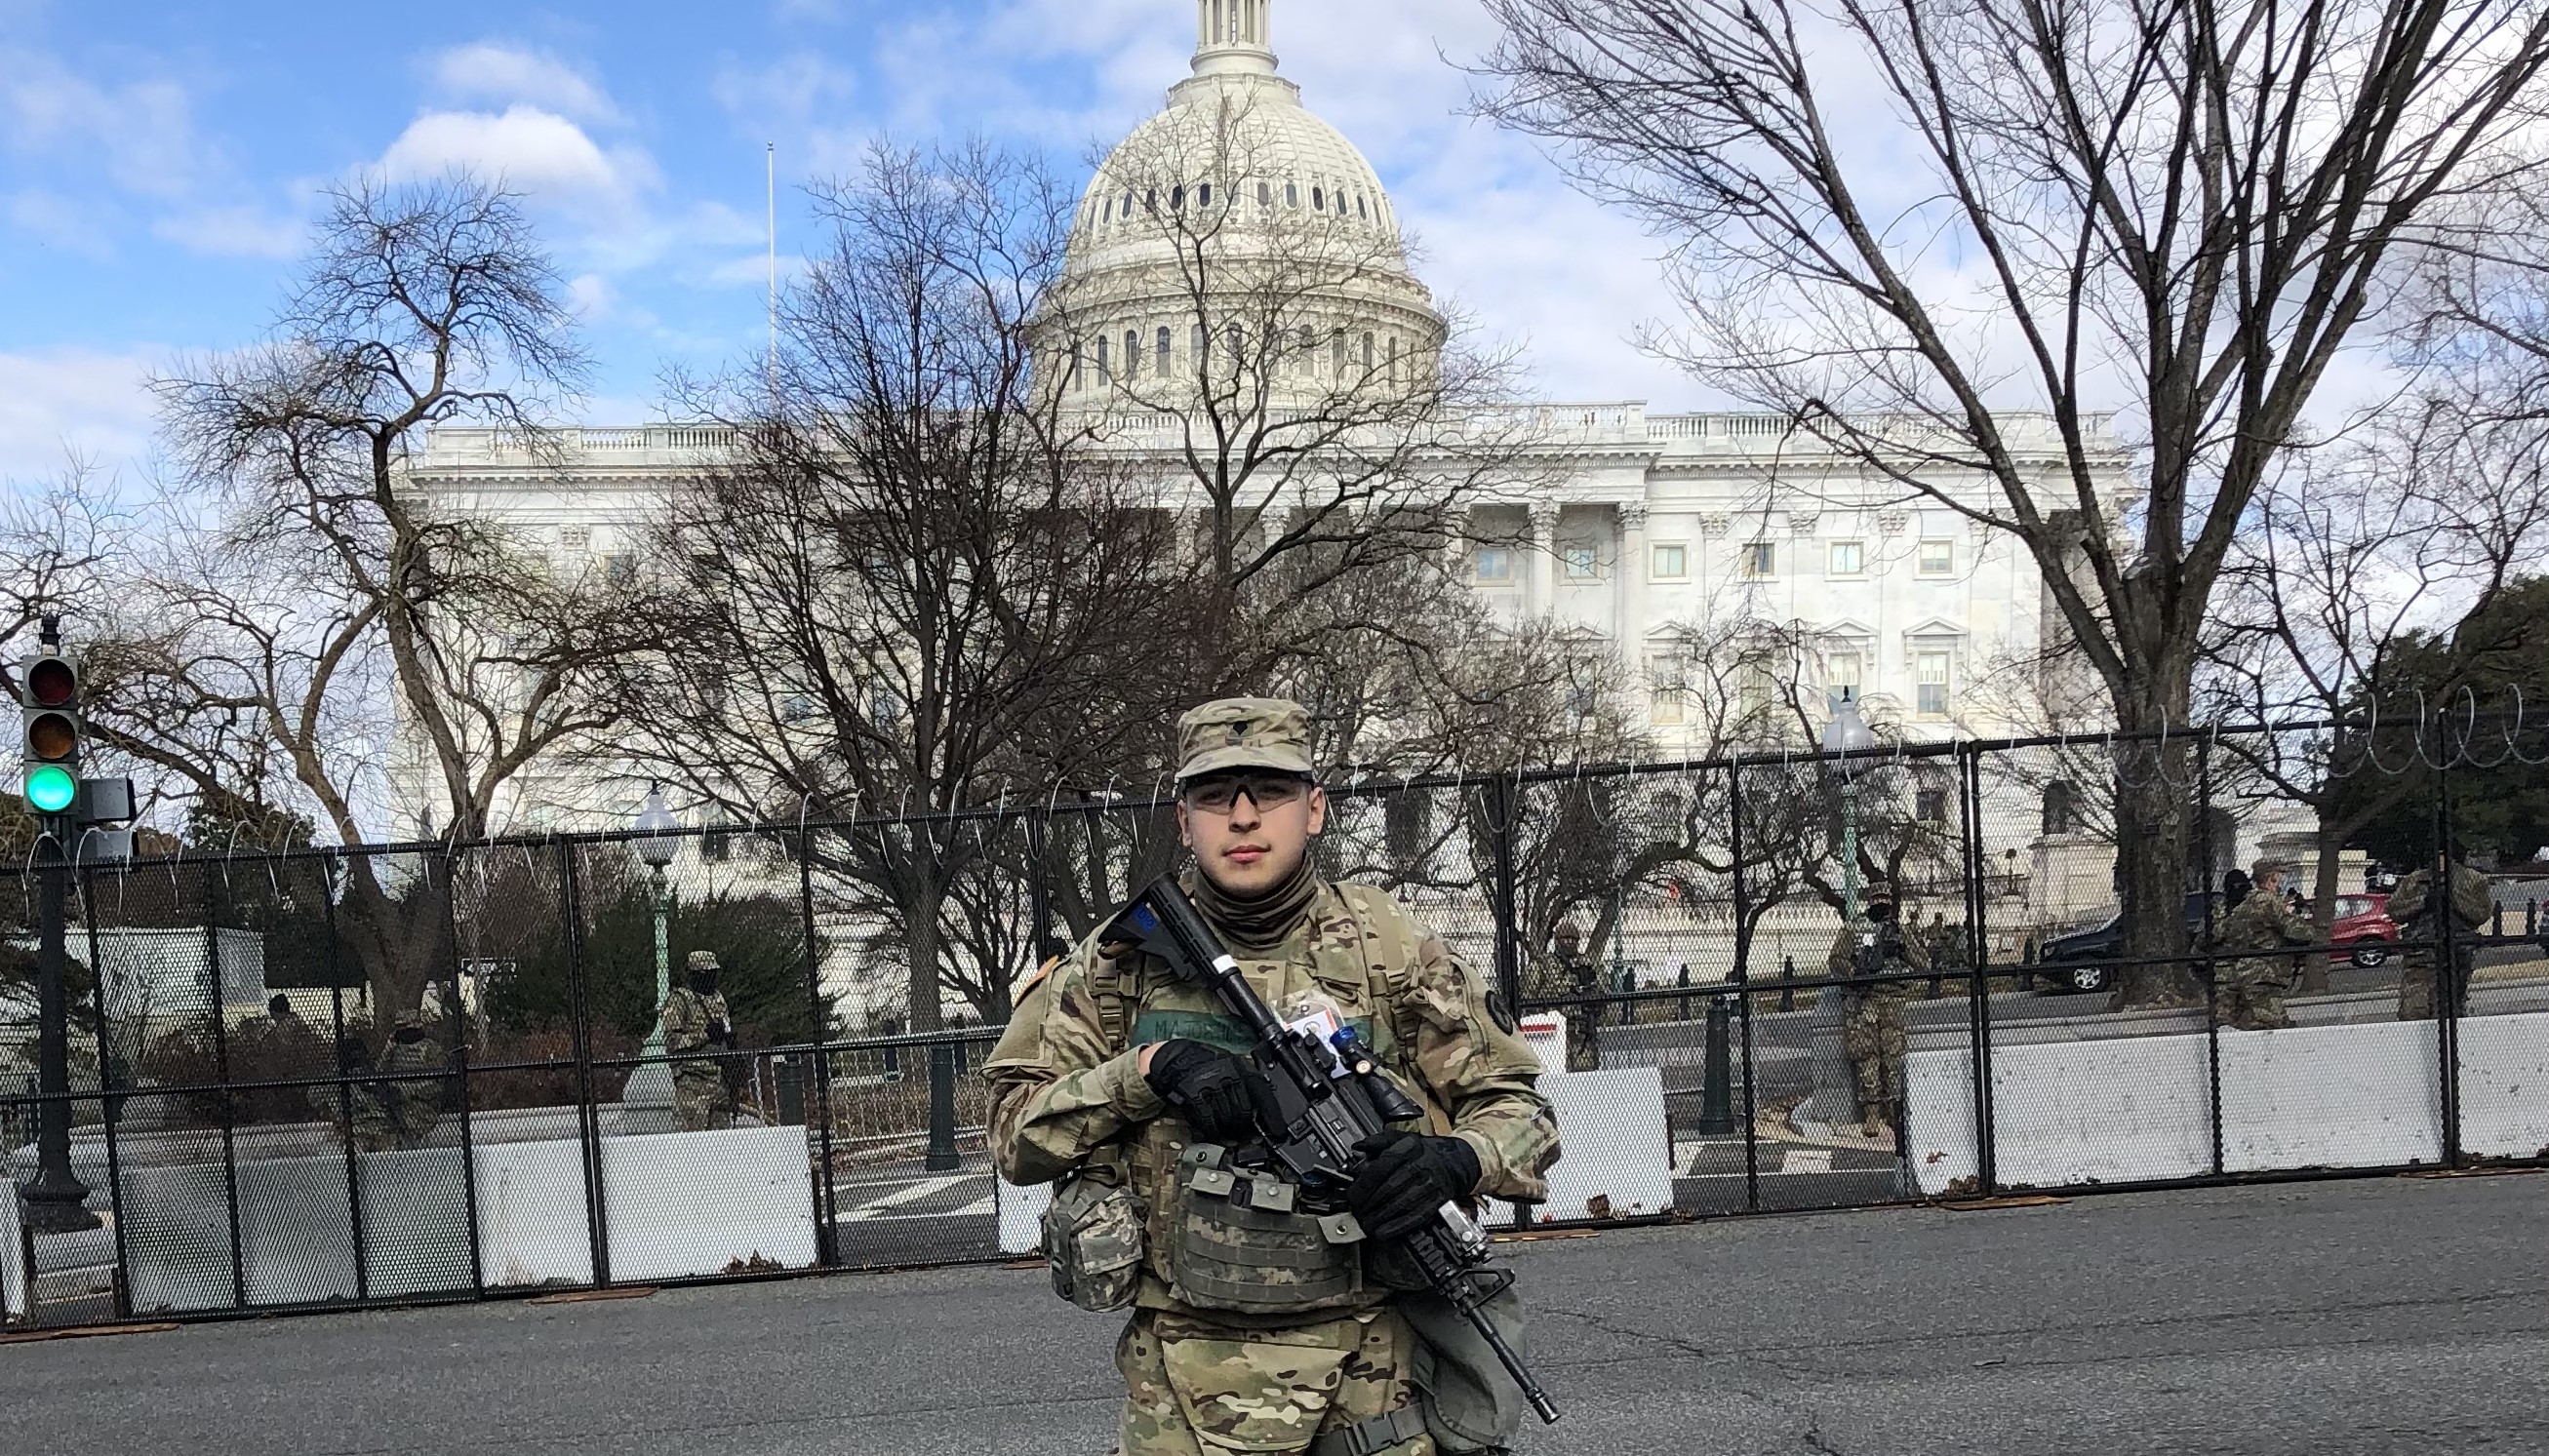 Kevin Luna Torres in his National Guard uniform protecting the Capitol